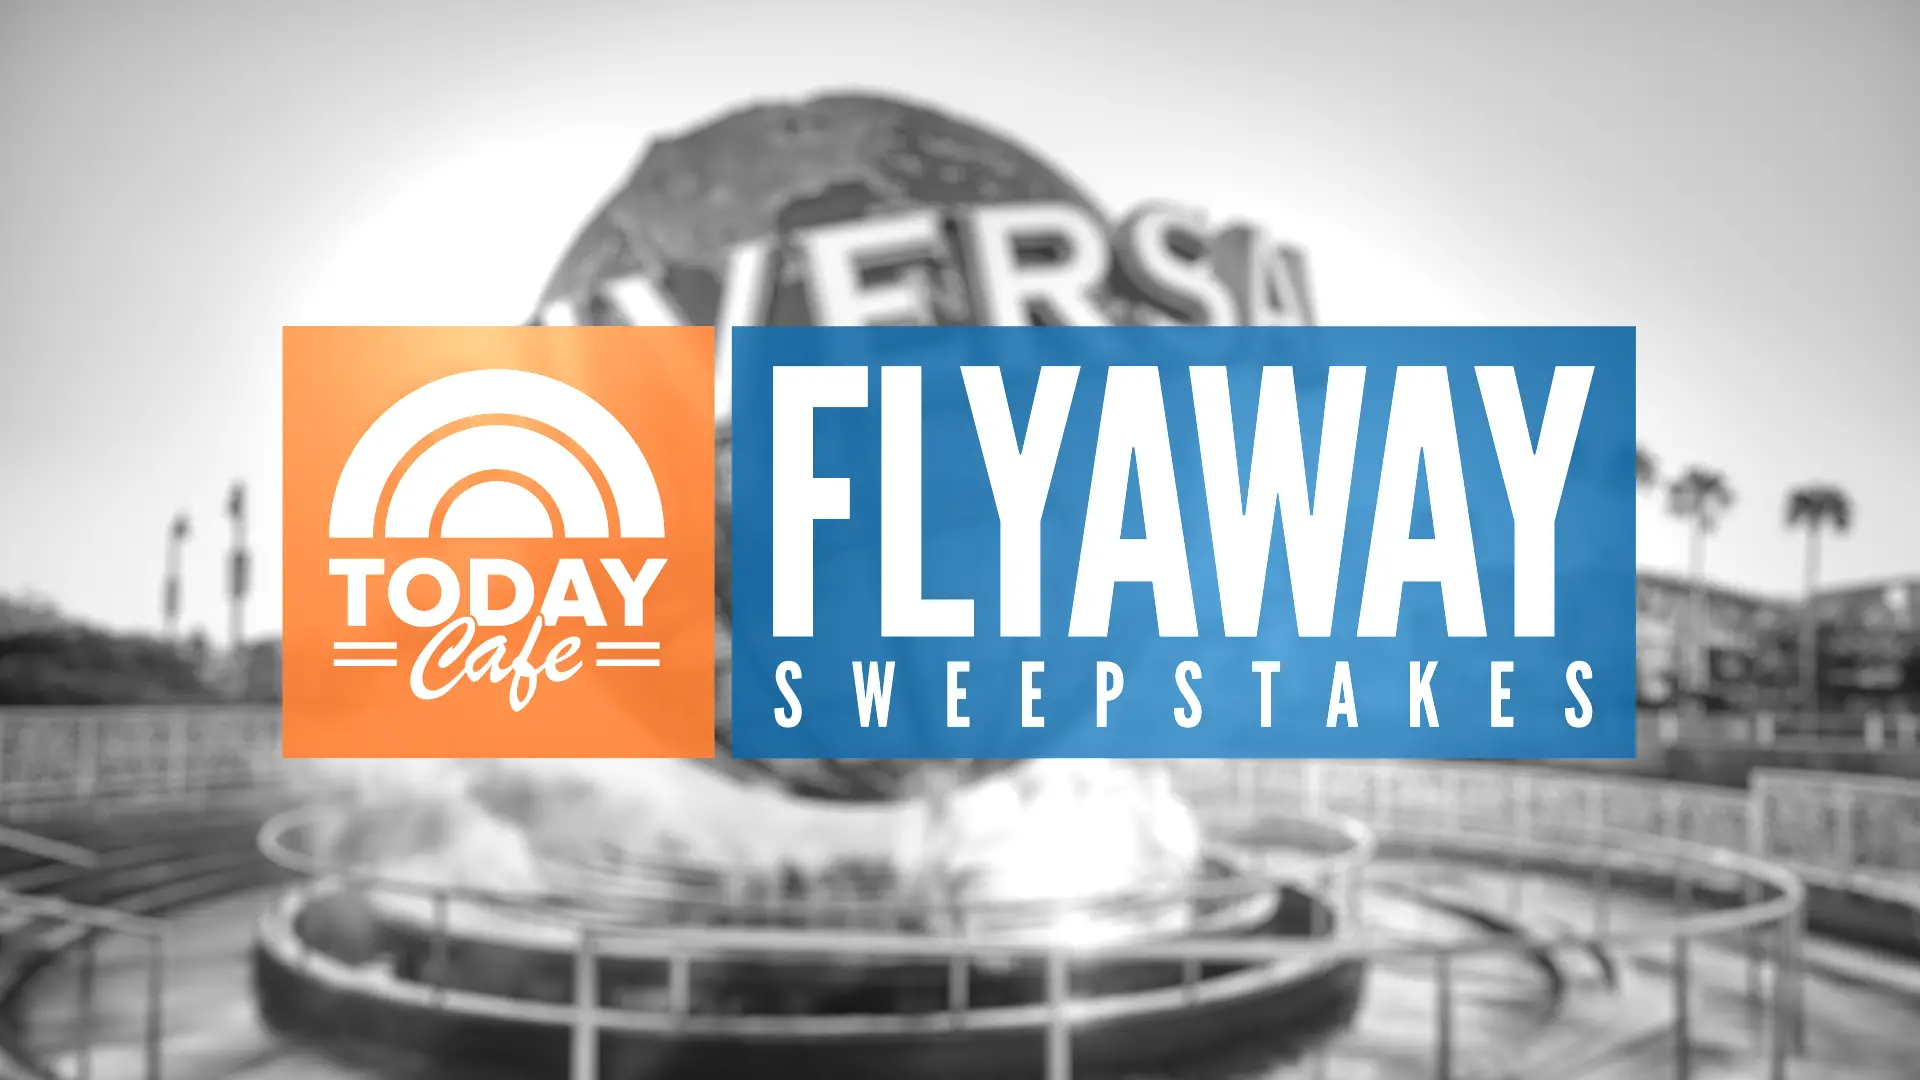 Enter for your chance to win a trip for 4 to Orlando, Florida for your fun in the sun at Universal Studios Florida and Universal’s Islands of Adventure theme parks and Universal’s Volcano Bay water theme park